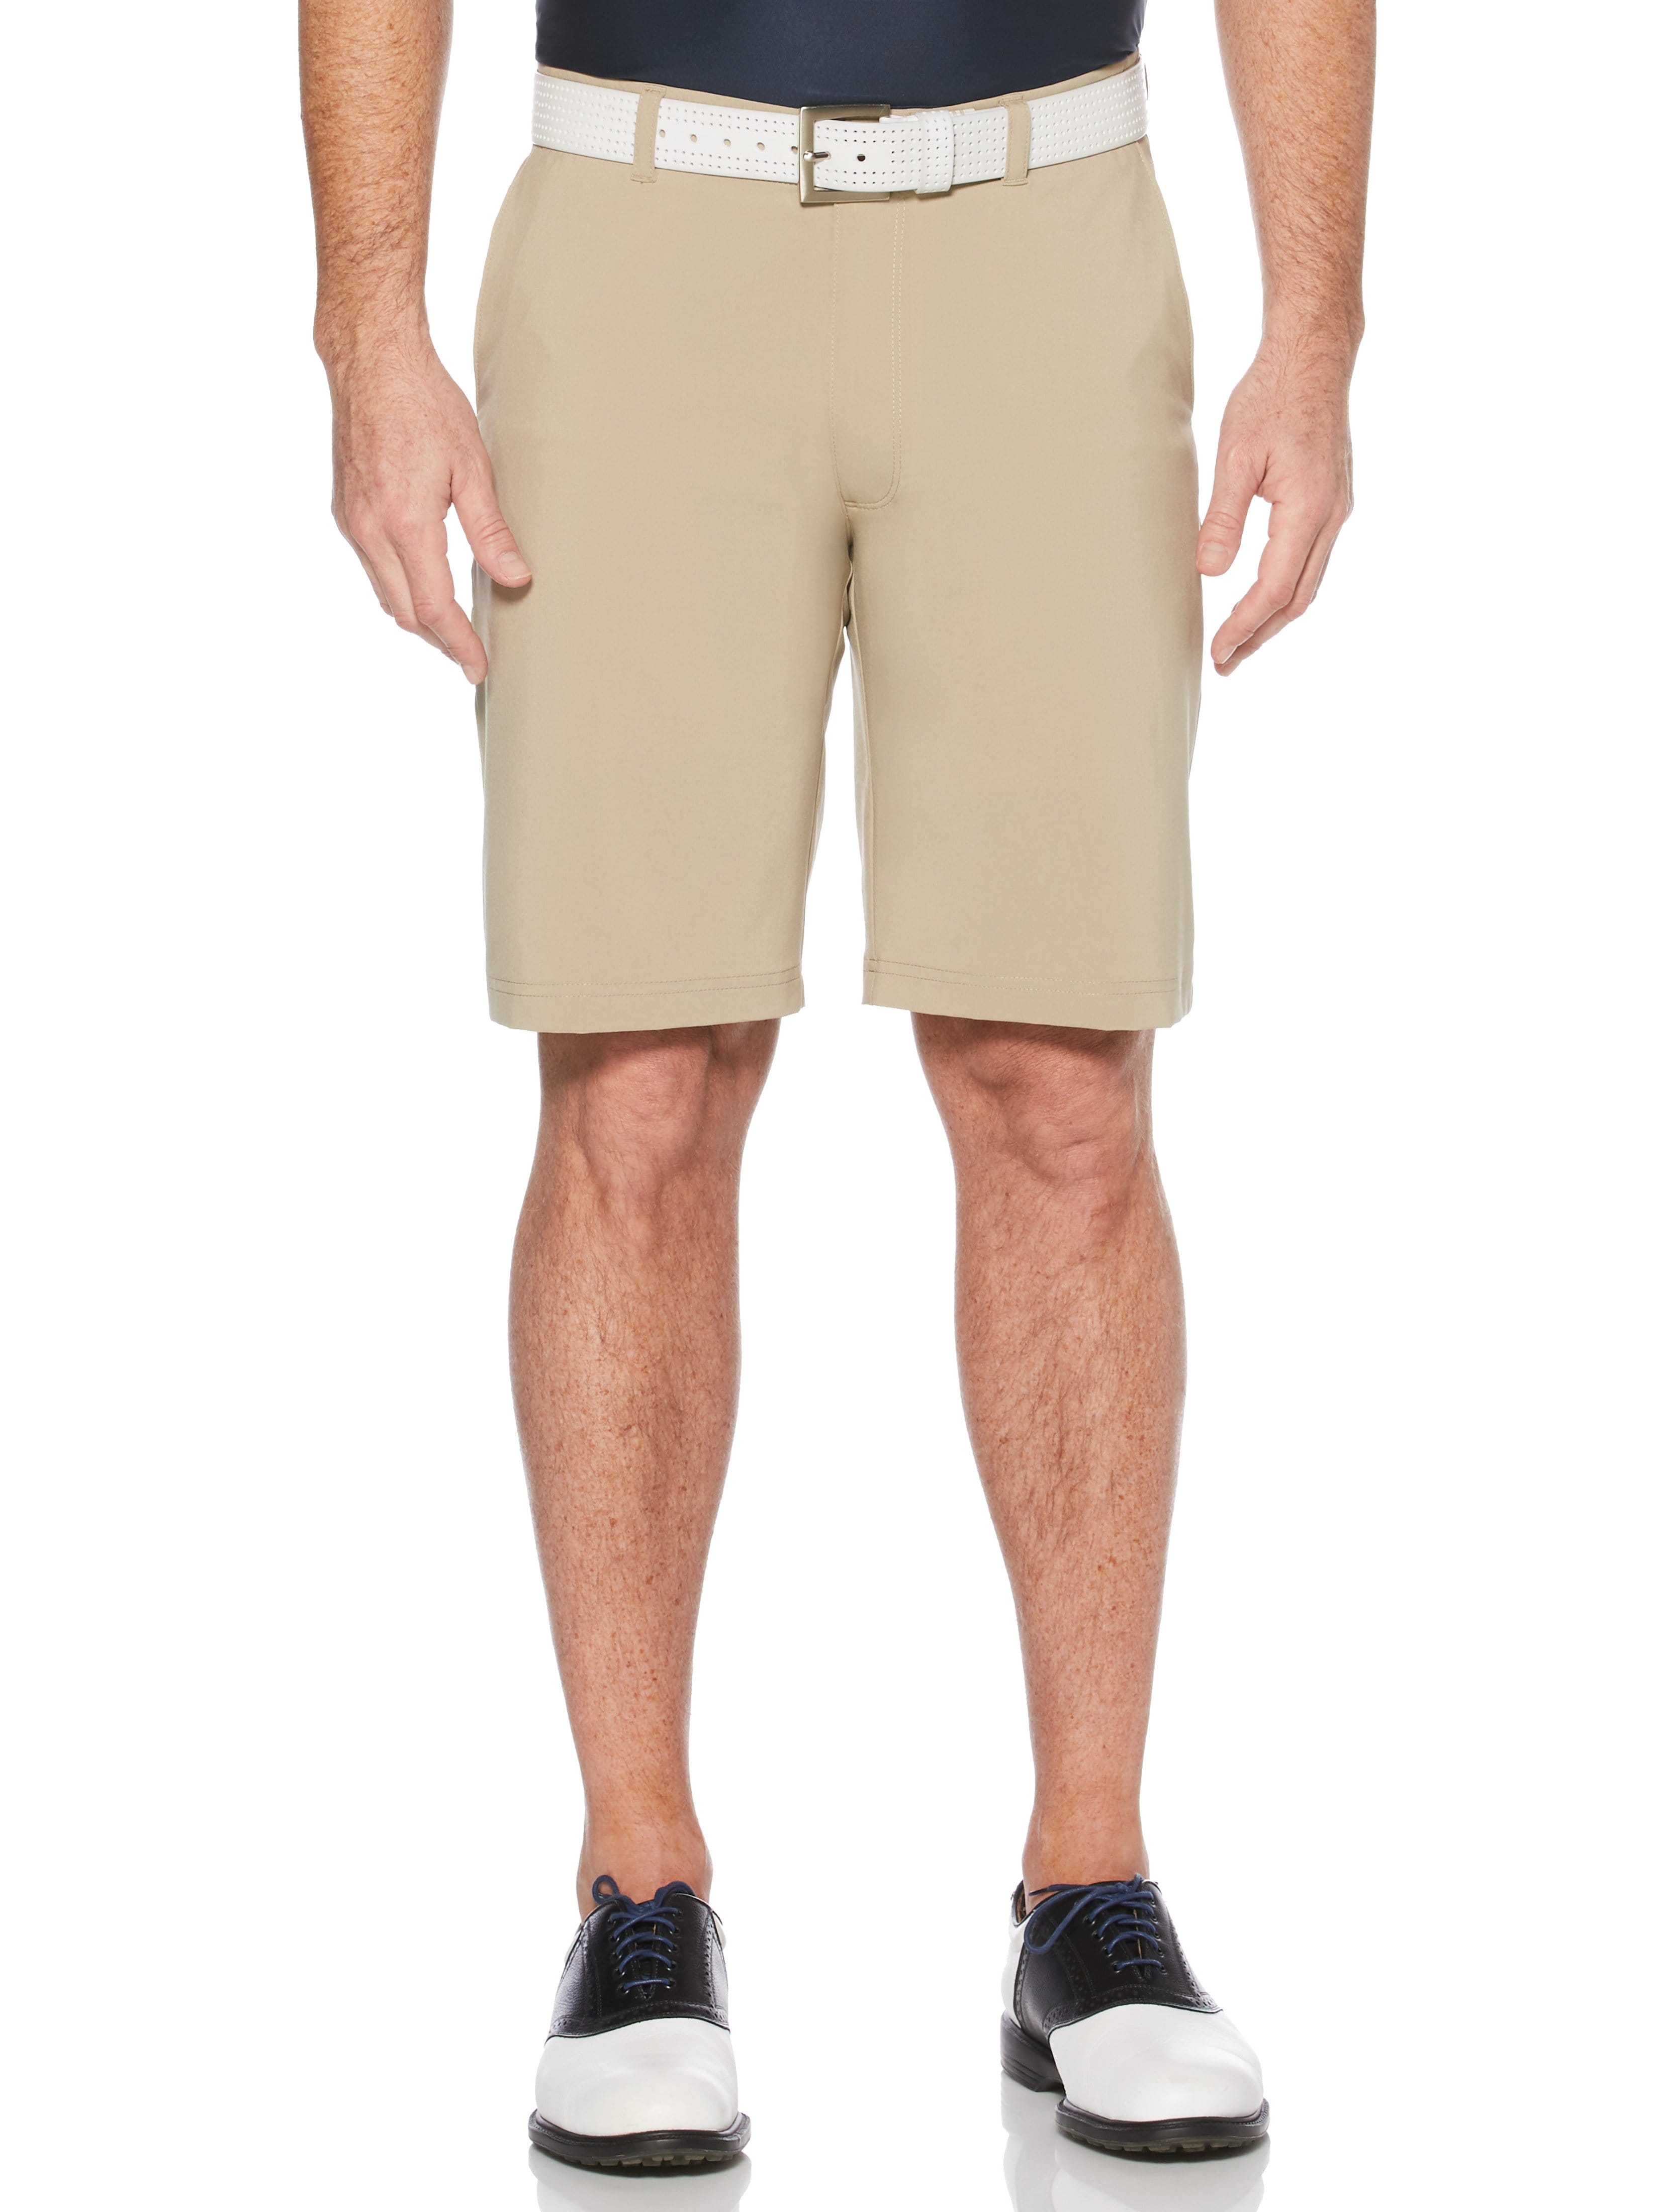 Jack Nicklaus Mens Flat Front Solid Golf Shorts w/ Active Waistband and Media Pocket, Size 30, Chinchilla Beige, Polyester/Elastane